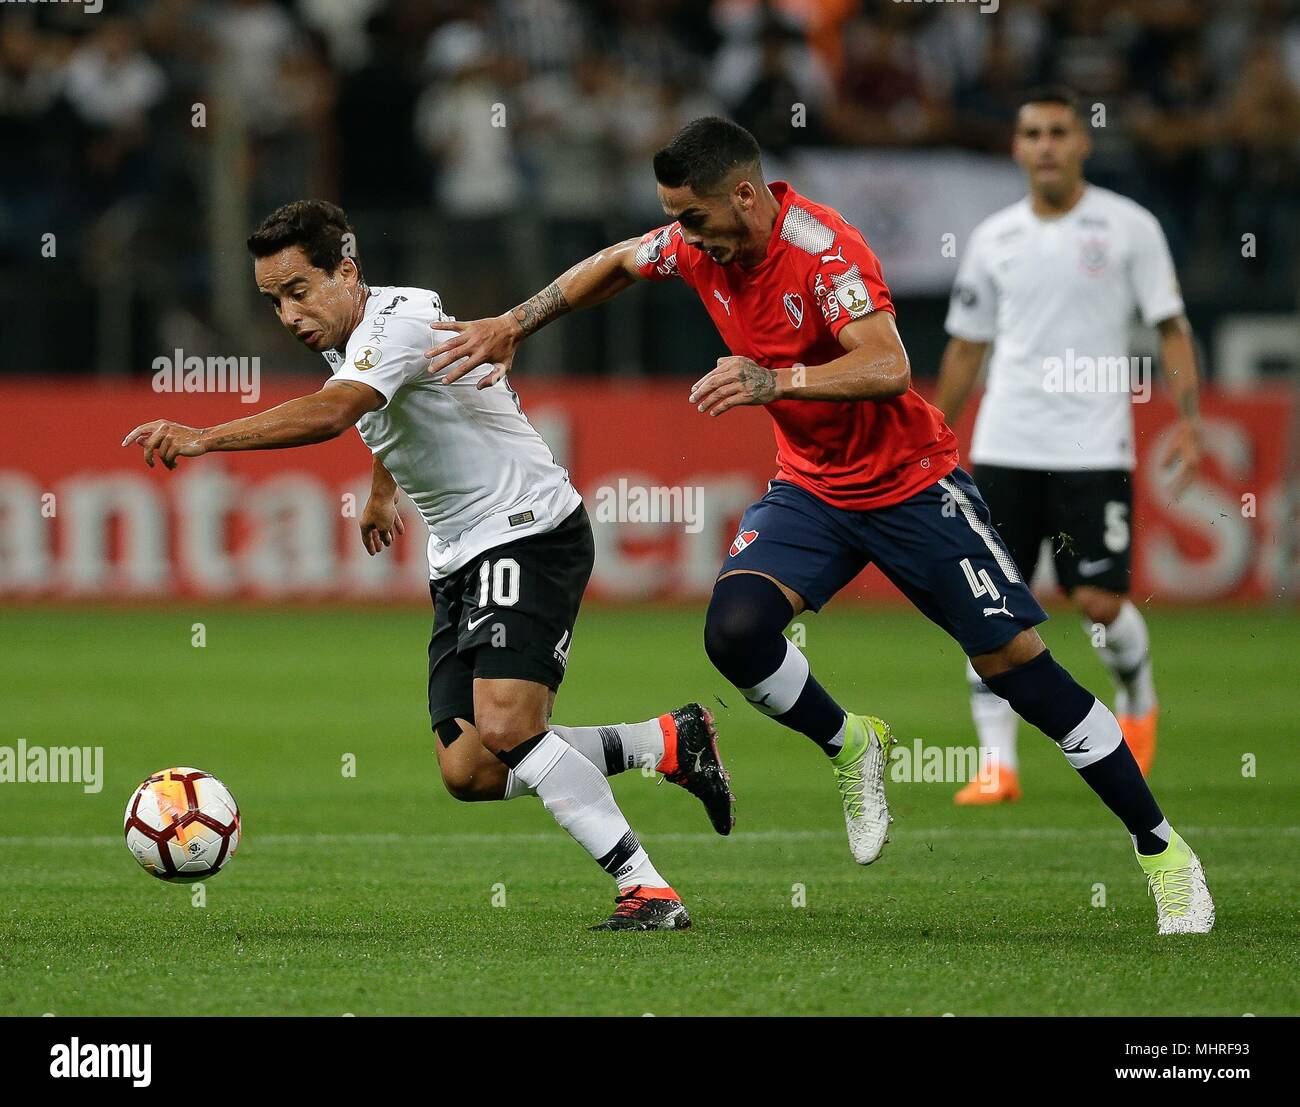 SÃO PAULO, SP - 02.05.2018: CORINTHIANS X INDEPENDIENTE - Corinthians'  Jadsoayplays the ballh Nicolás Figal do Independiente during a maa match  between Corinthians and Club Atlético Independiente (Argentina), valid for  the fourth